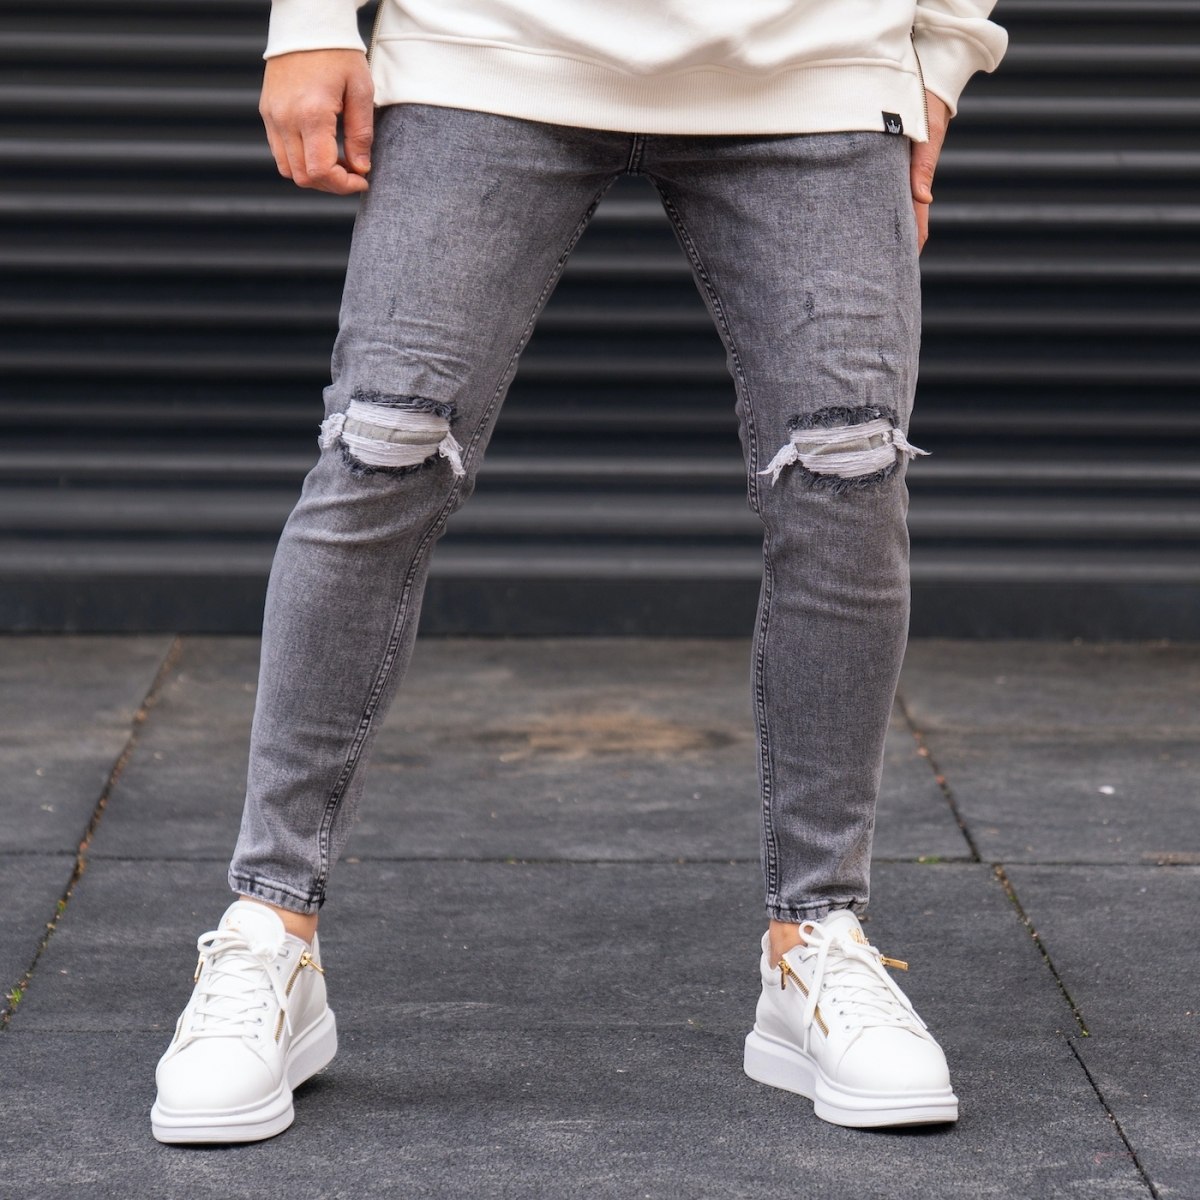 Men's Knees Ripped Jeans in Smoked Grey - 1